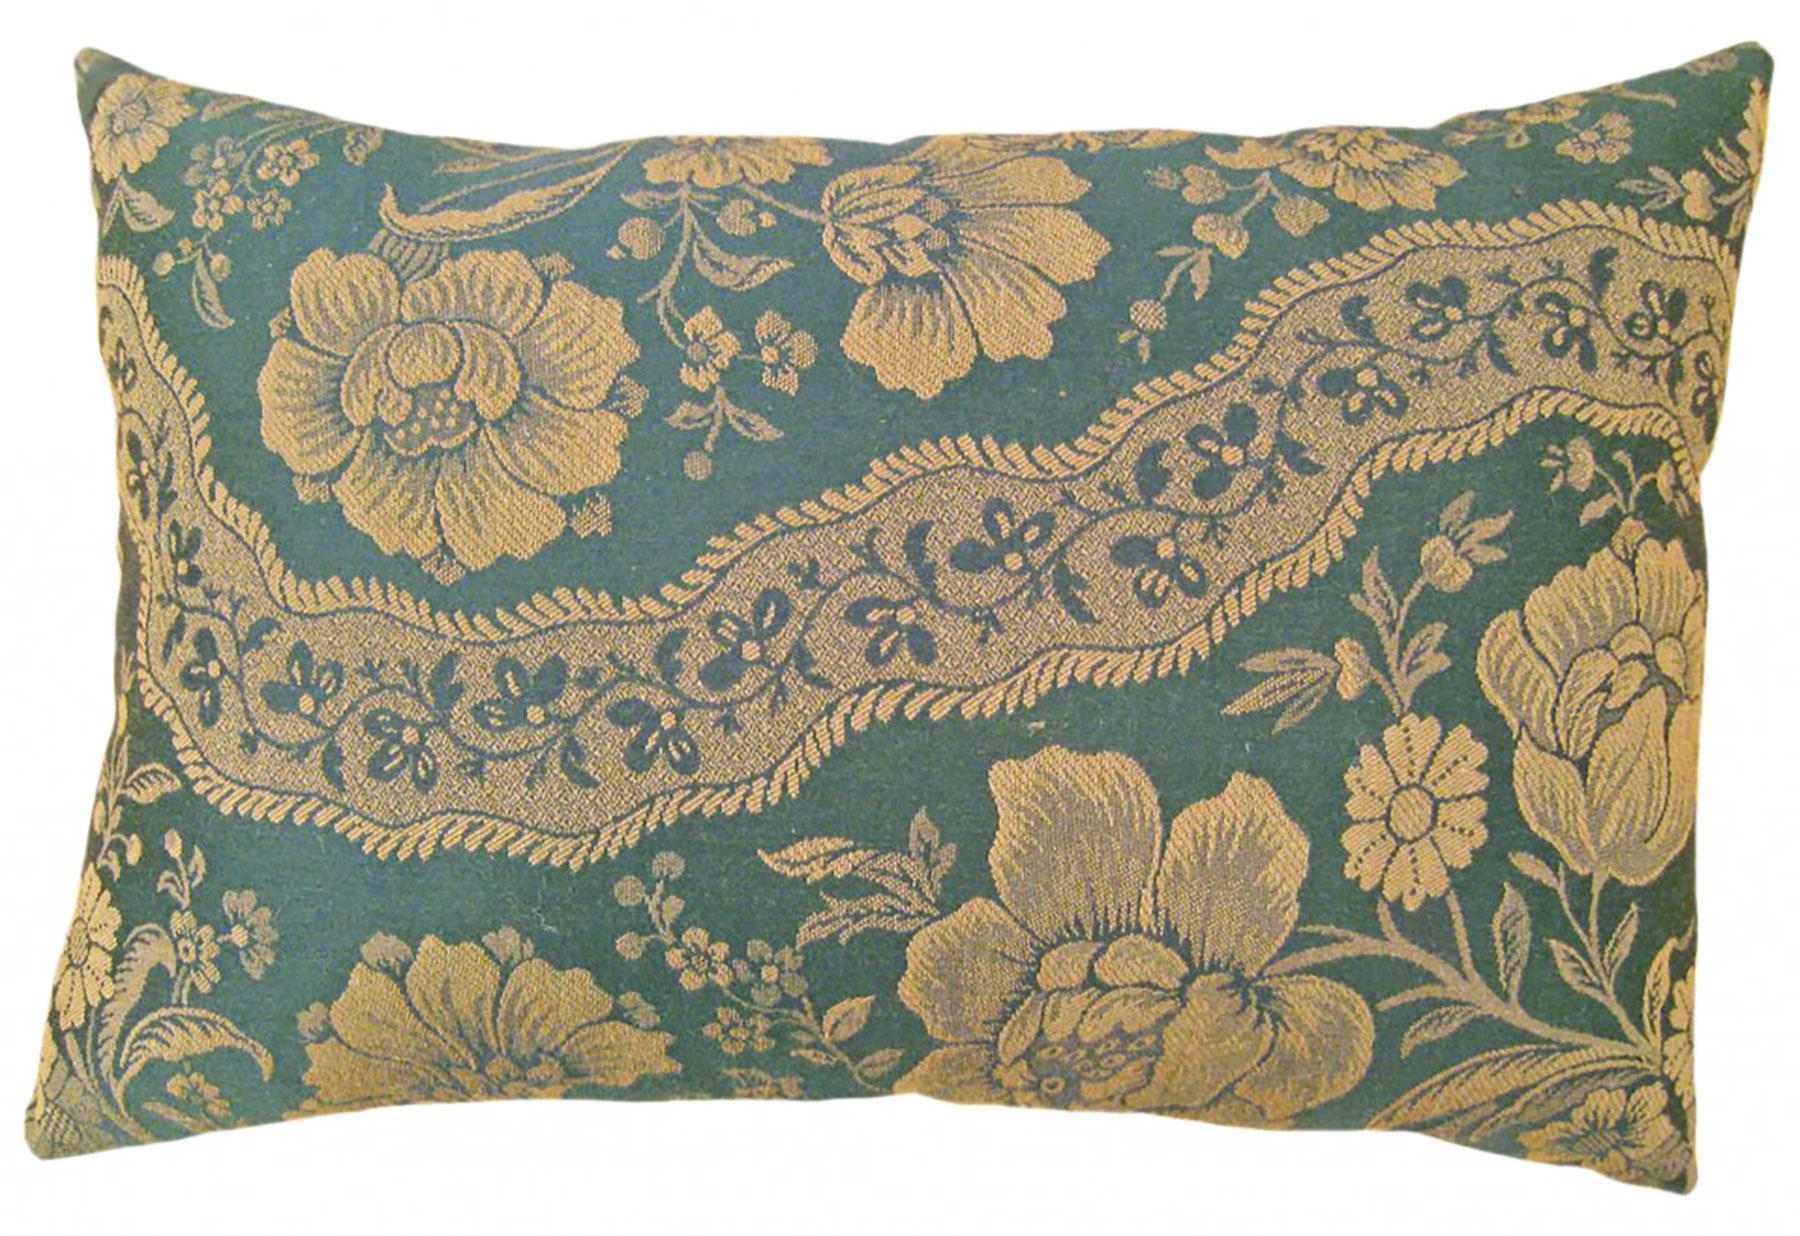 Set of Decorative Vintage European Chinoiserie Fabric Pillows with Floral For Sale 4